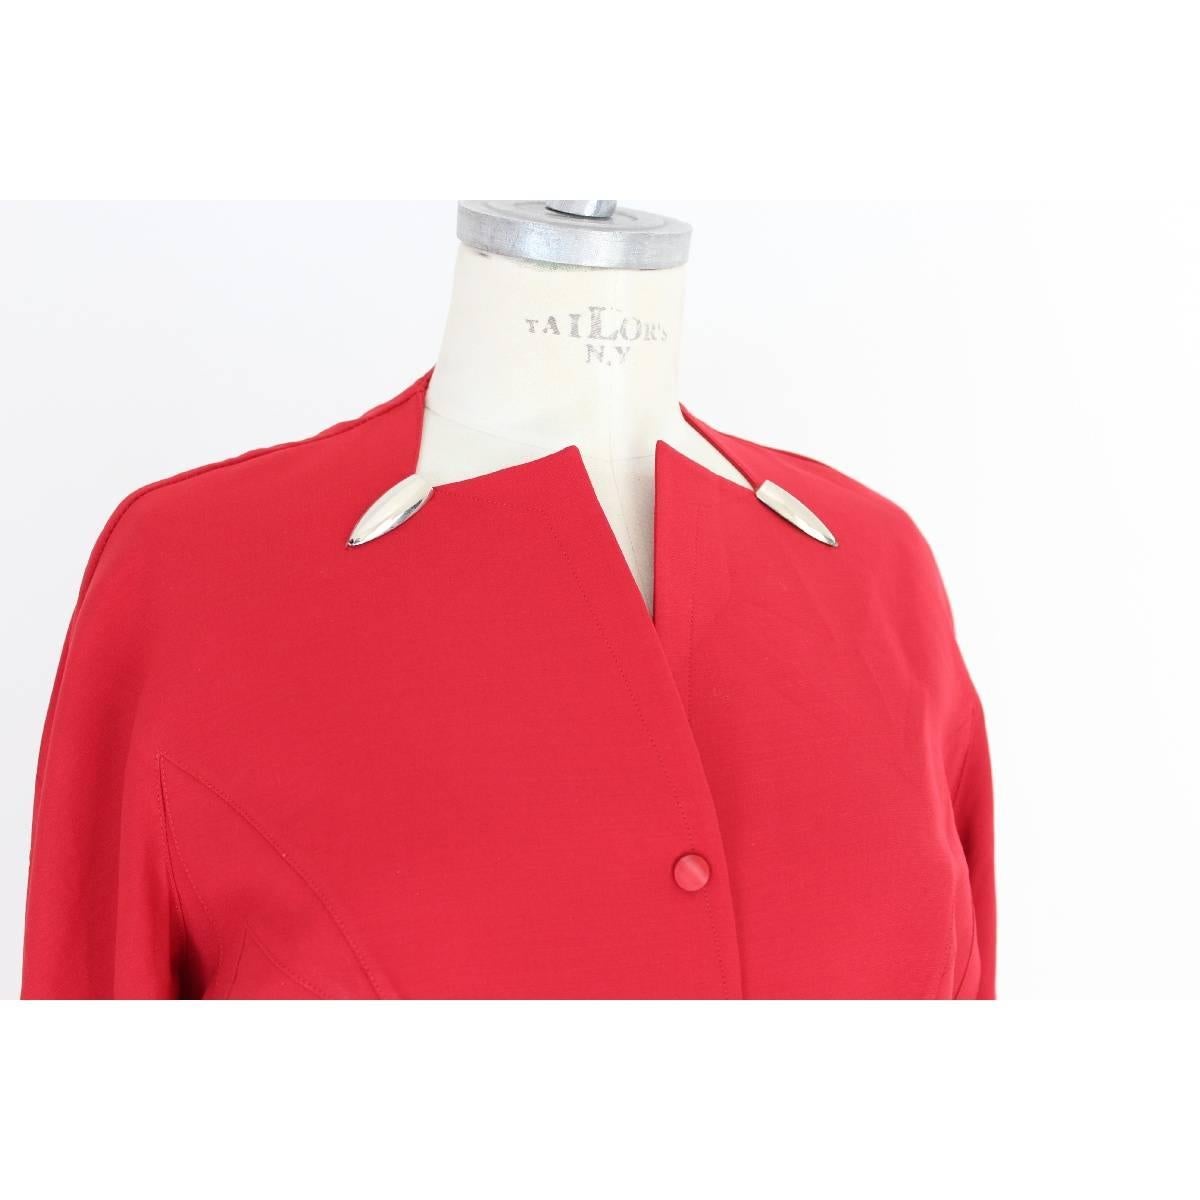 Women's Thierry Mugler Paris 100% worsted wool red dress size 44 it vintage 1980s 